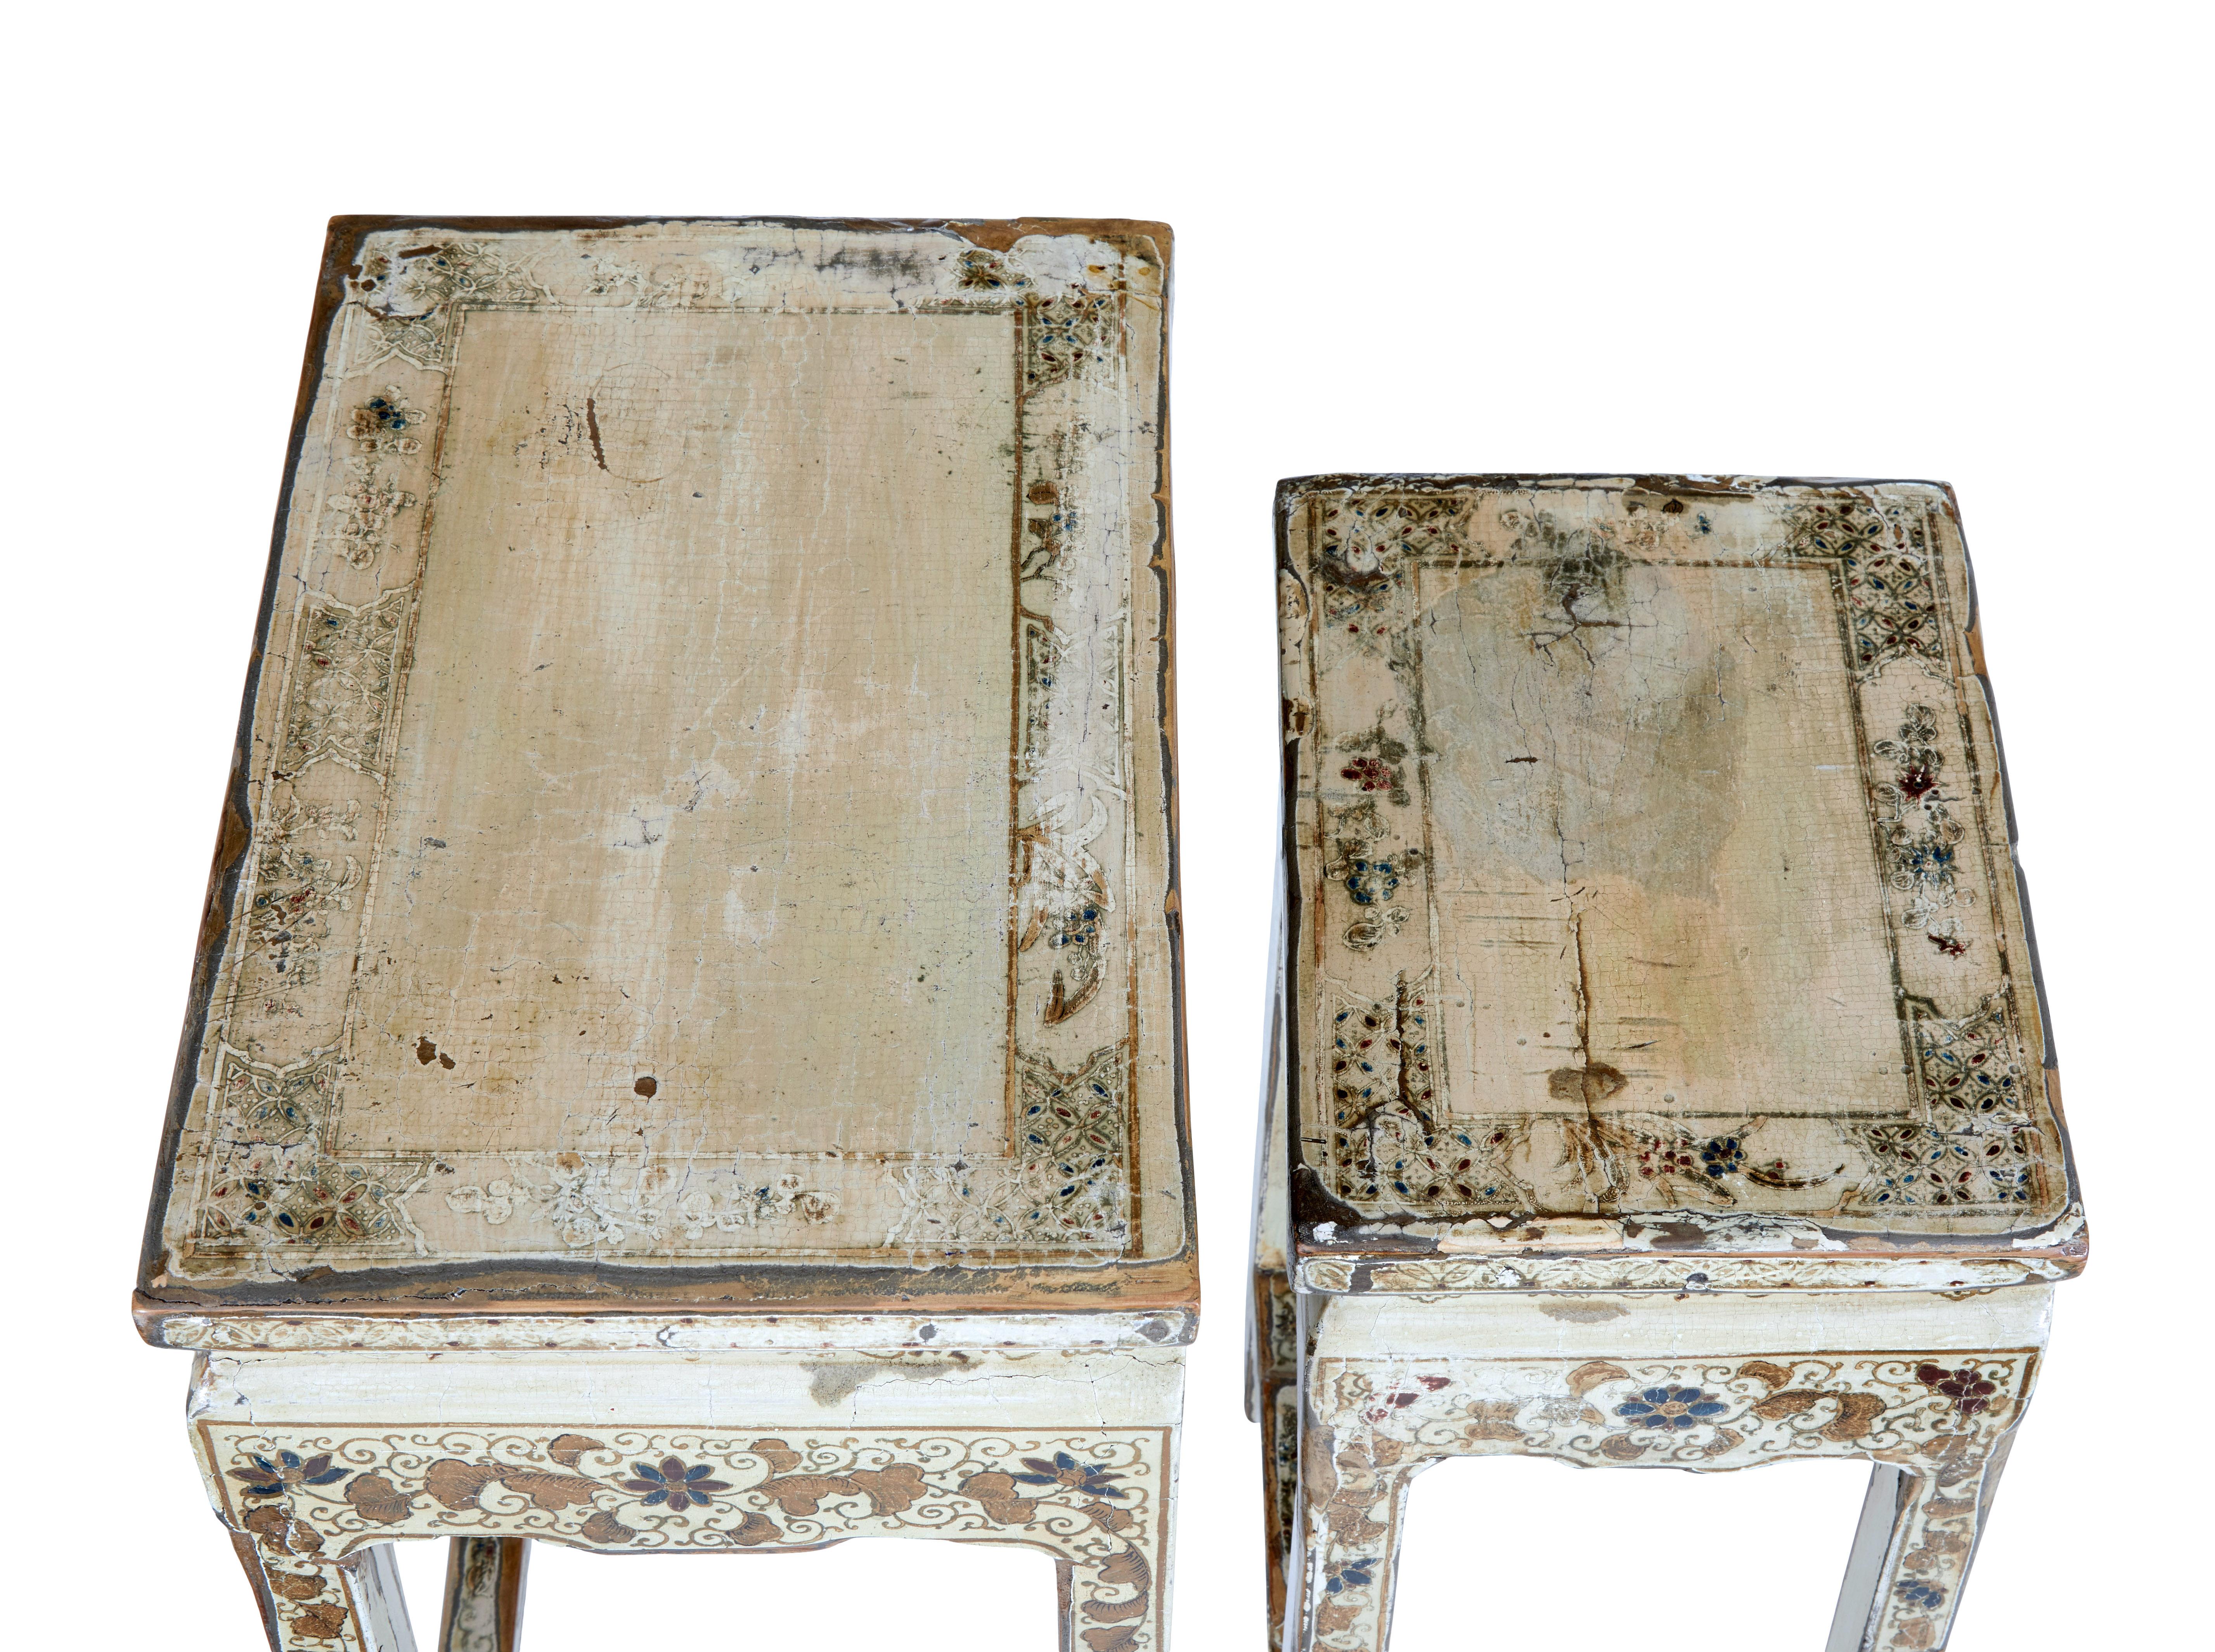 Early 20th Century Nest of 4 Lacquered and Decorated Tables 1